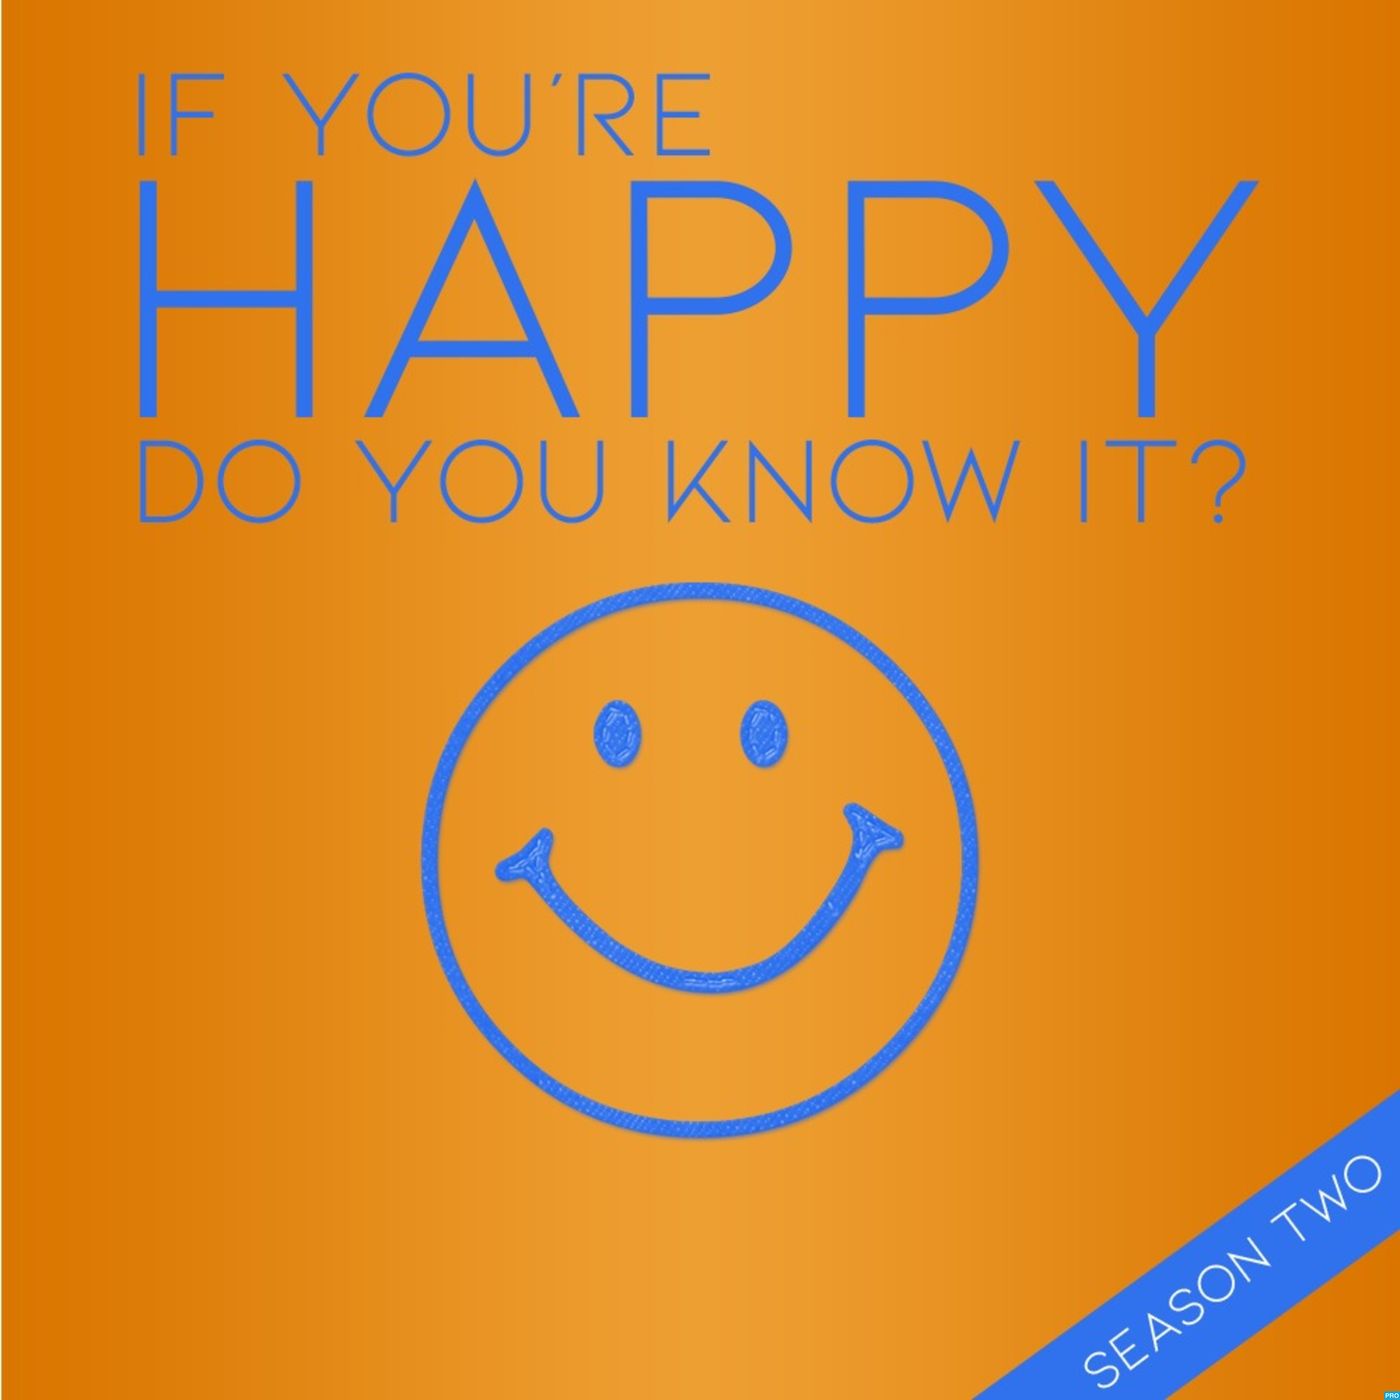 If You’re Happy, Do You Know It?